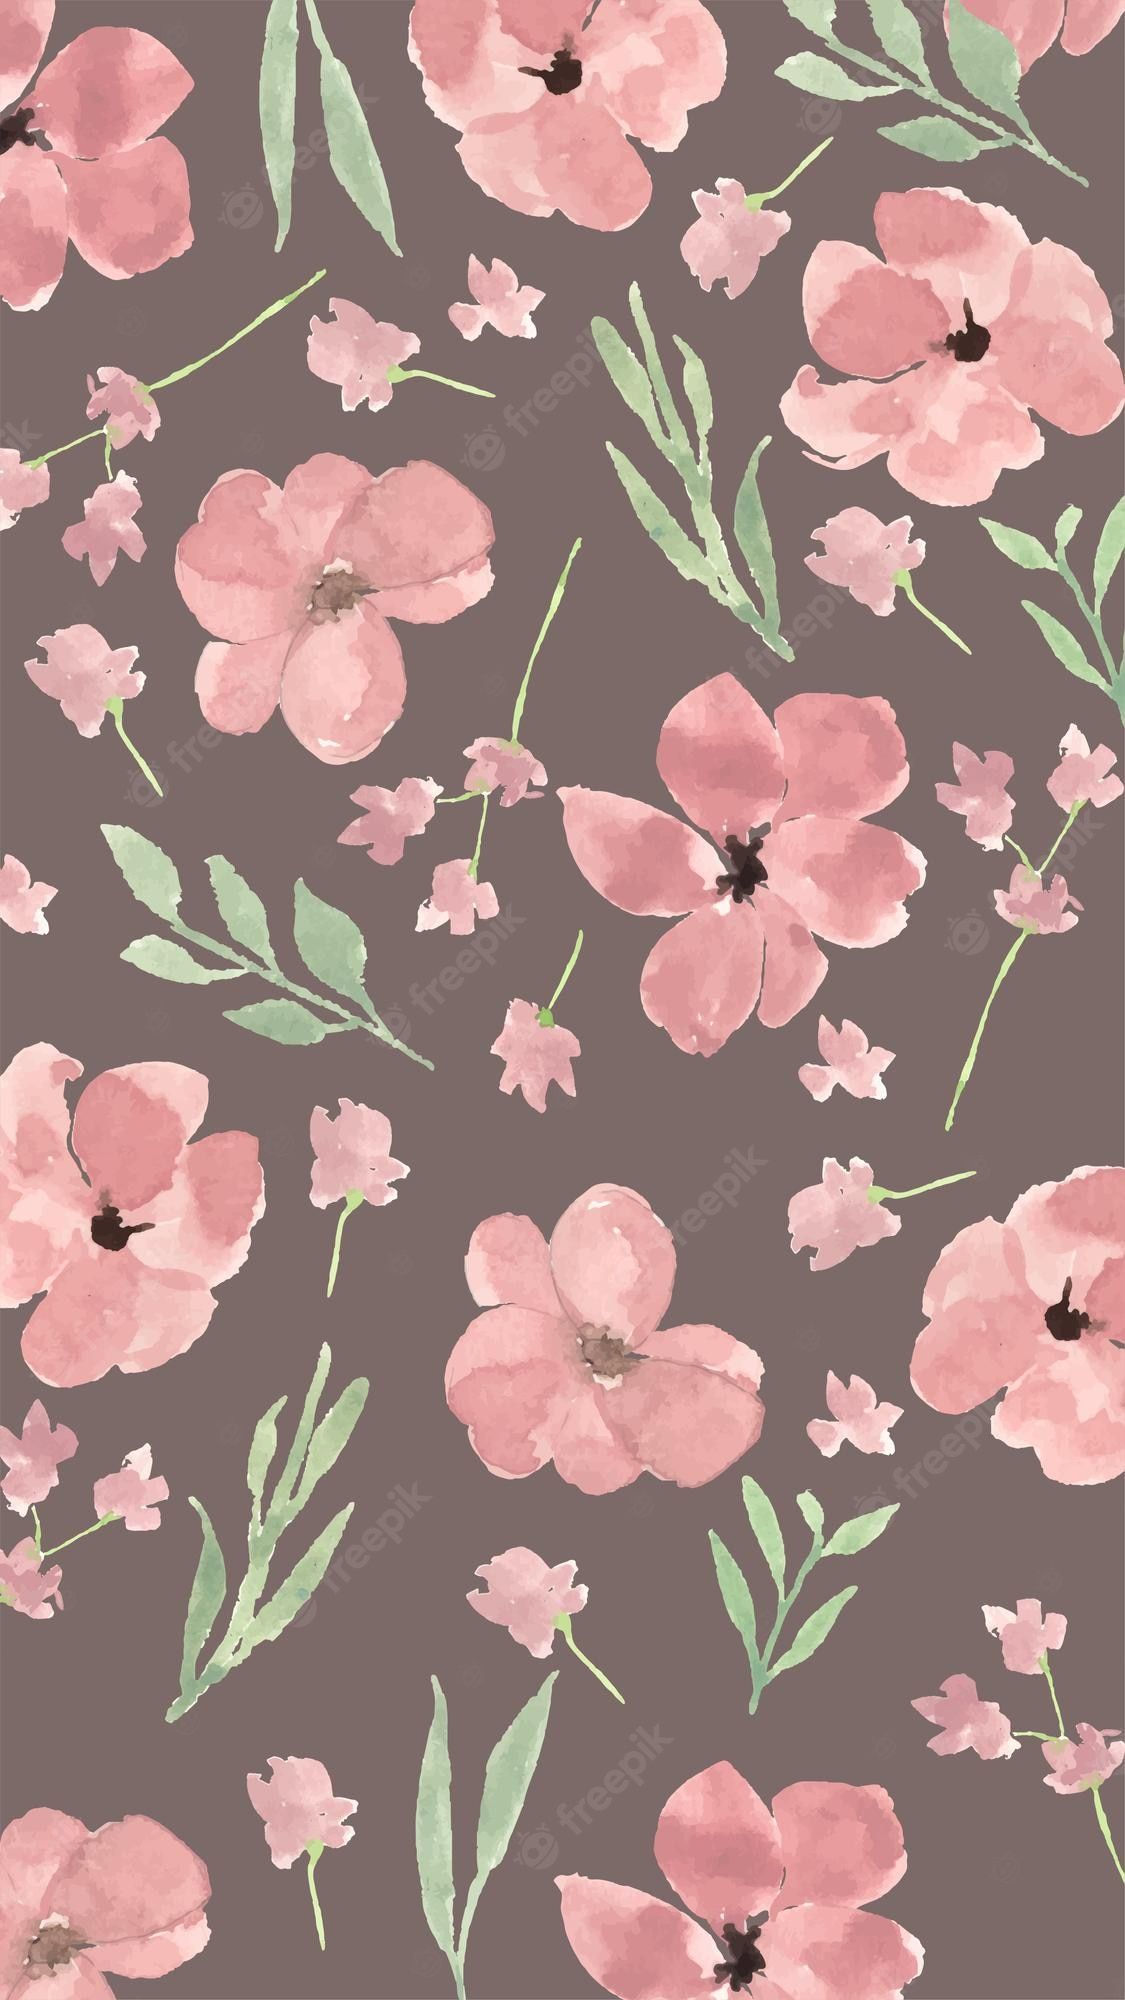 A floral background image - Watercolor